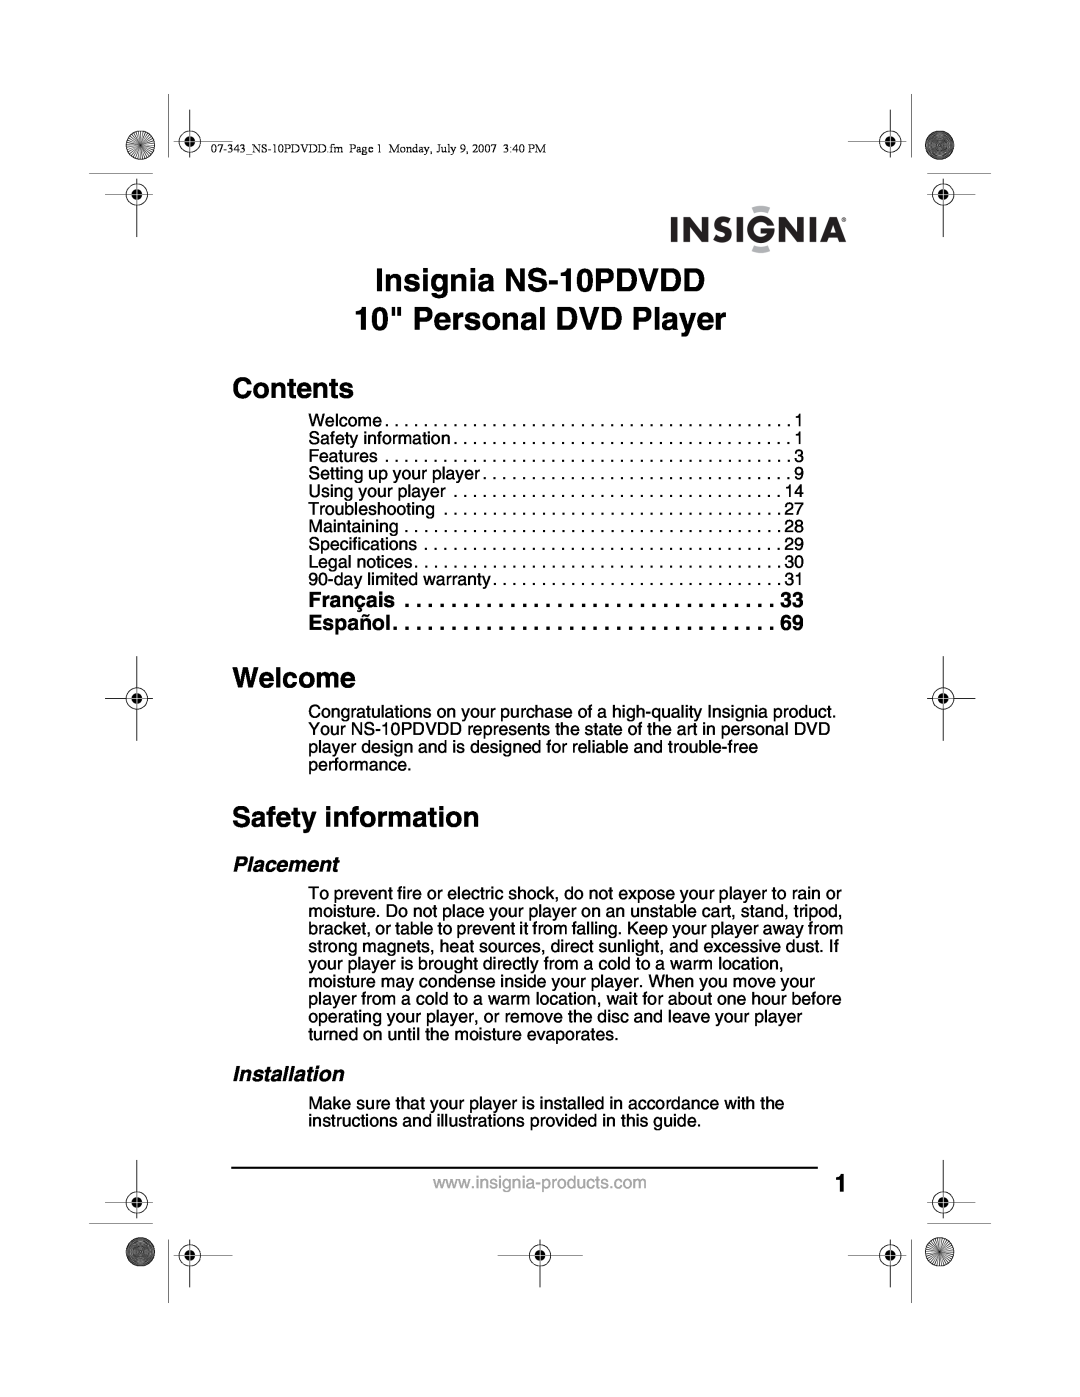 Insignia Insignia NS-10PDVDD 10 Personal DVD Player, Contents, Welcome, Safety information, Placement, Installation 